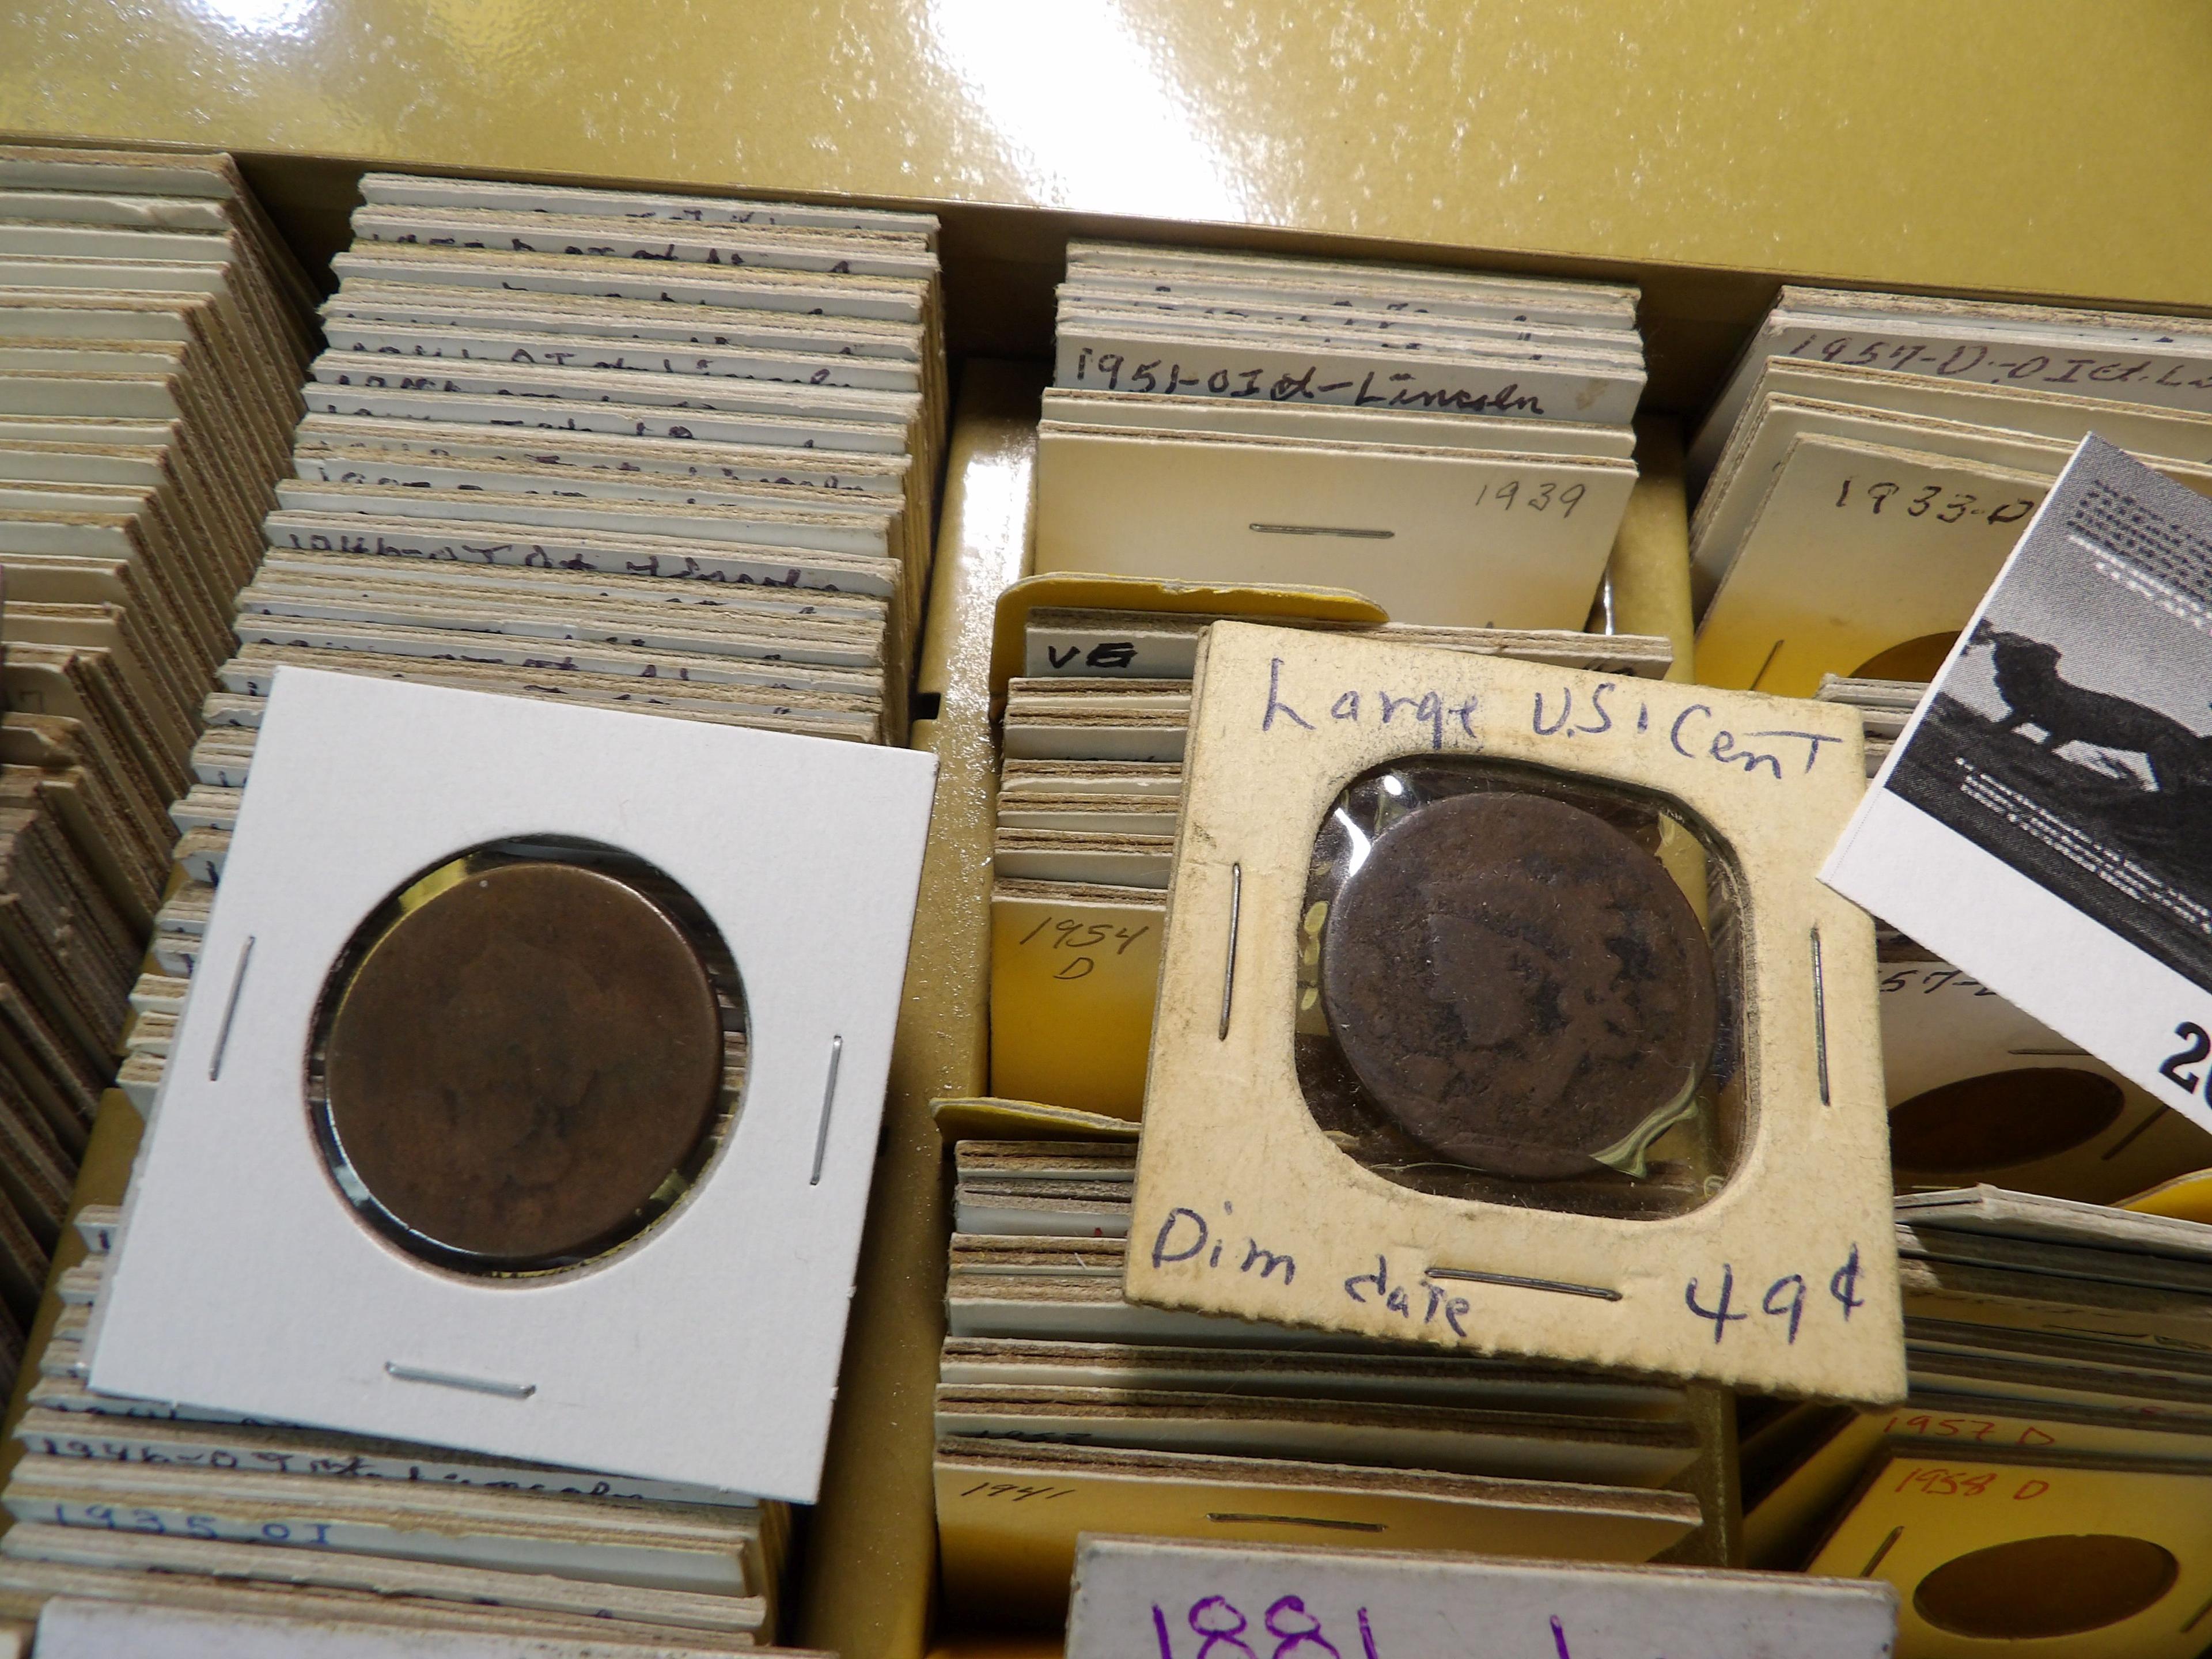 Large Group of Coins in a 2" x 2" Slide case. Mostly Wheat back Cents, but includes a 1935 P Buffalo